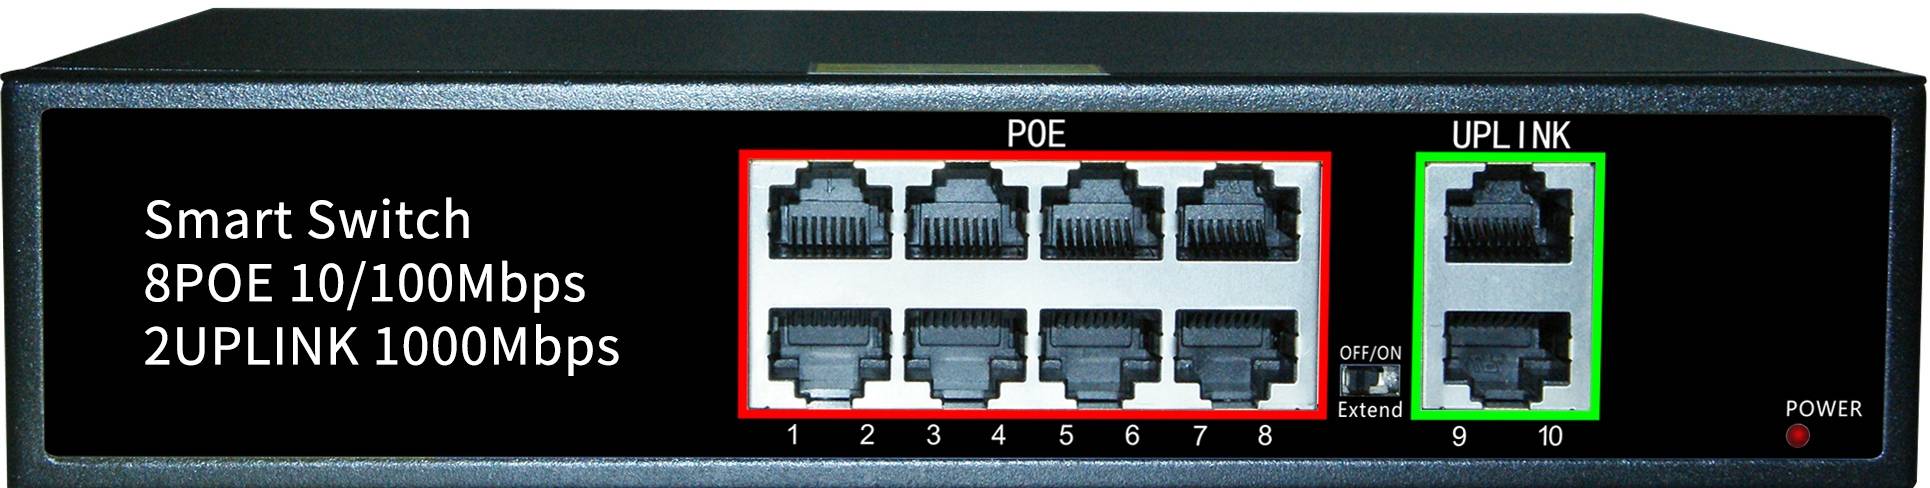 China Wholesale 24 Port Gigabit Poe Switch Factory Suppliers - 8*10/100Mbps RJ45 PoE Port +2*10/100/1000mbps RJ45 Uplink Port,Build-In Power Supply JHA-P30208CBMH – JHA